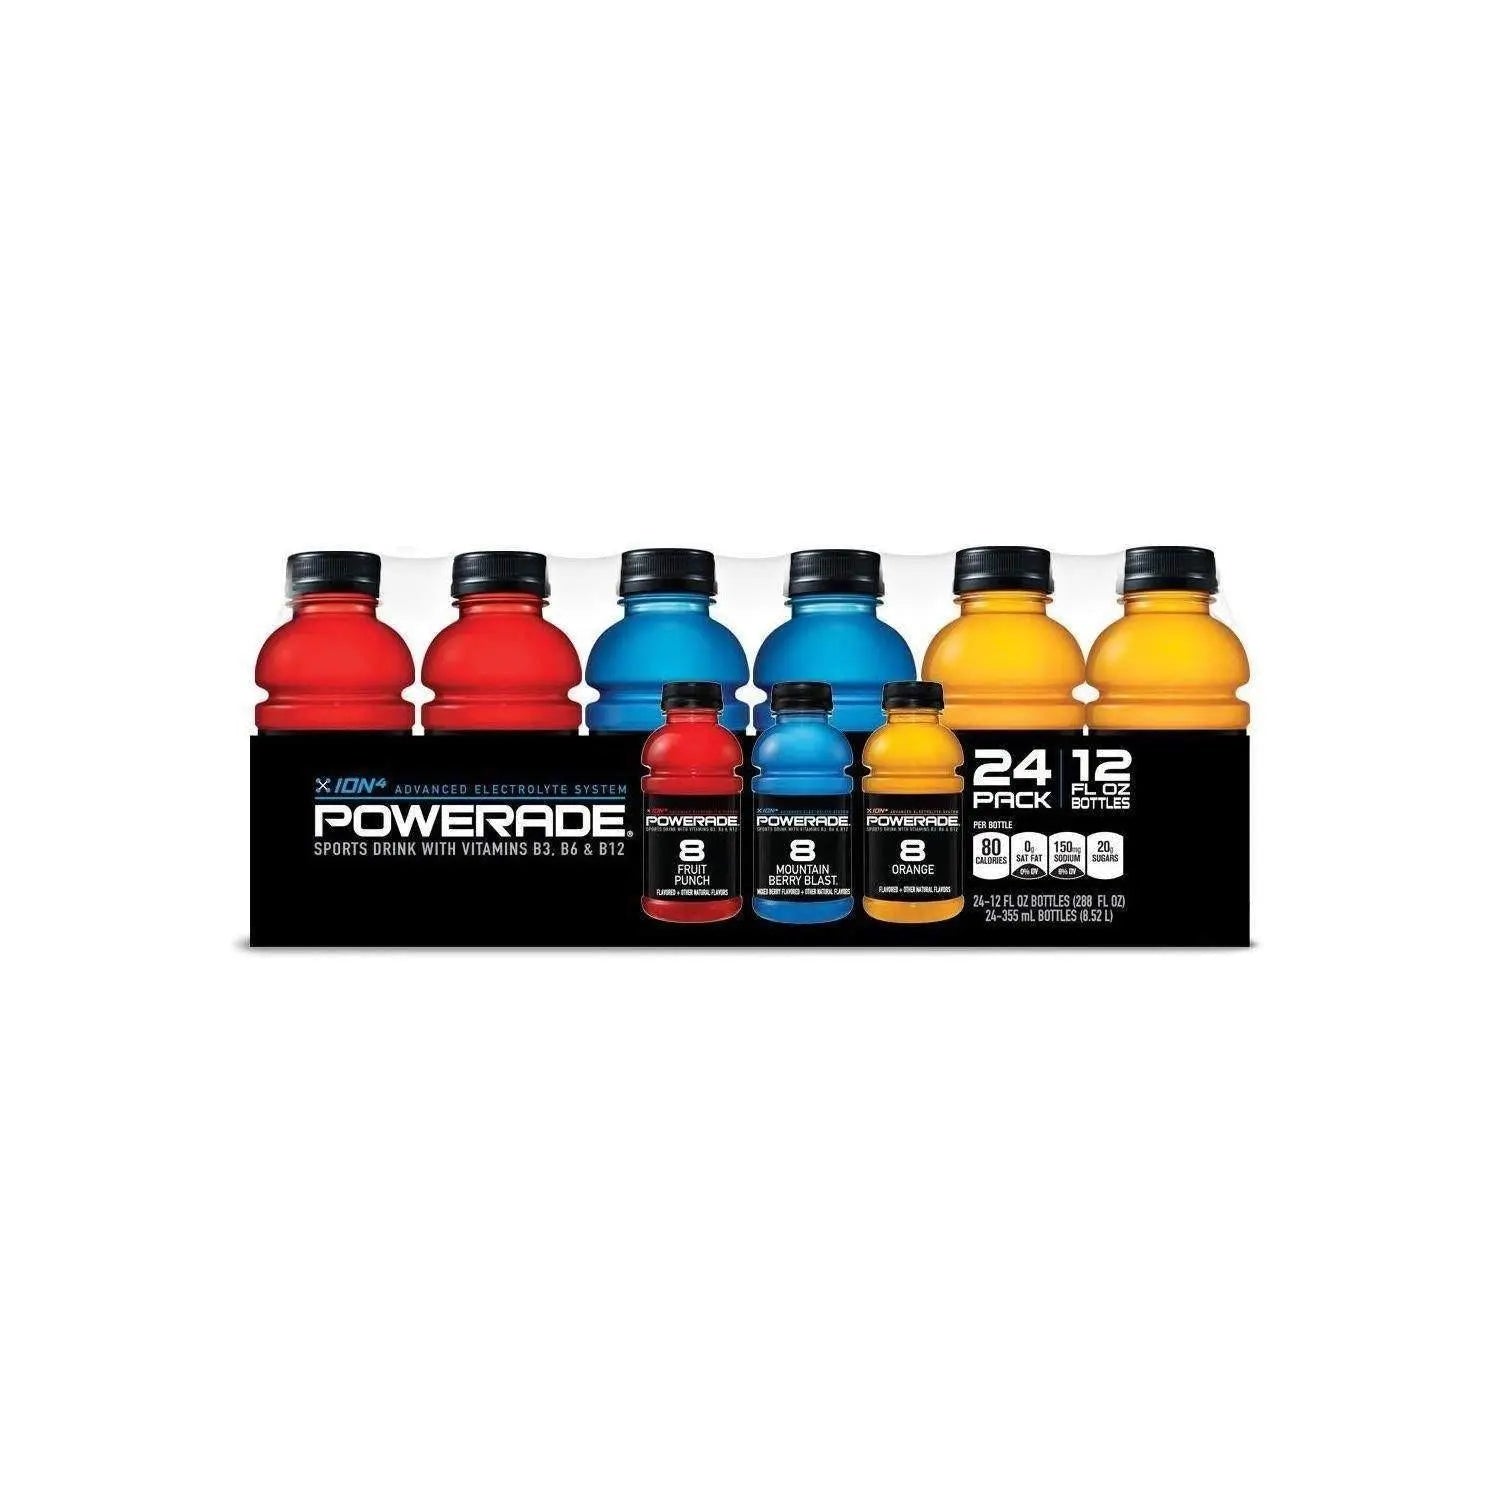 Wholesale prices with free shipping all over United States Powerade Sports Drink Variety Pack - Steven Deals